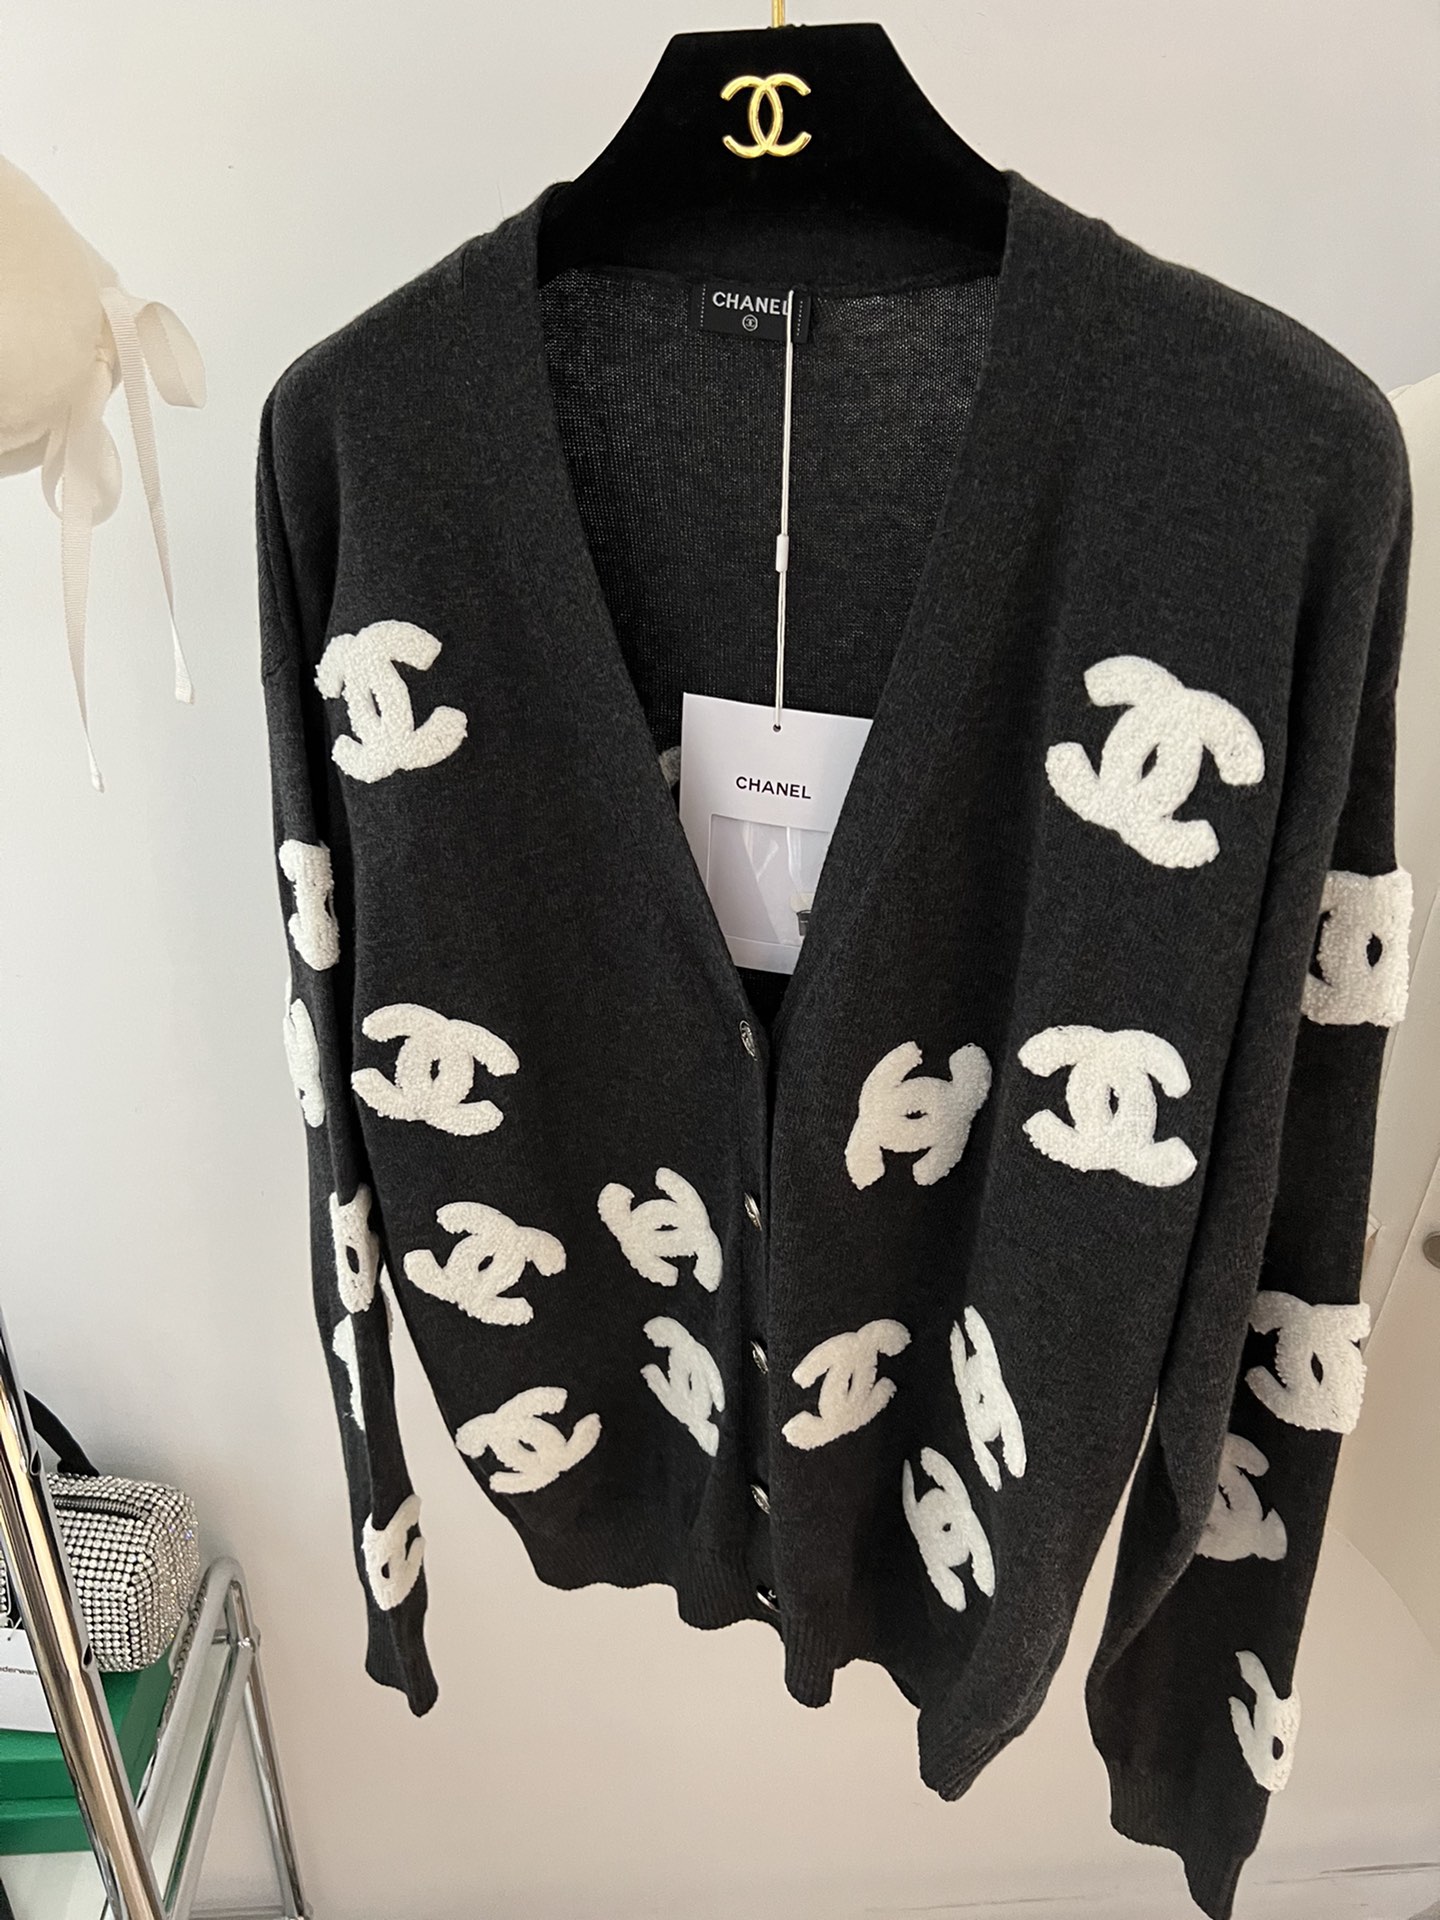 CHANEL CHANEL Sequin cardigan knitwear P32758K00782 cashmere Black White  Used Women 40 P32758K00782Product Code2104101965805BRAND OFF Online  Store